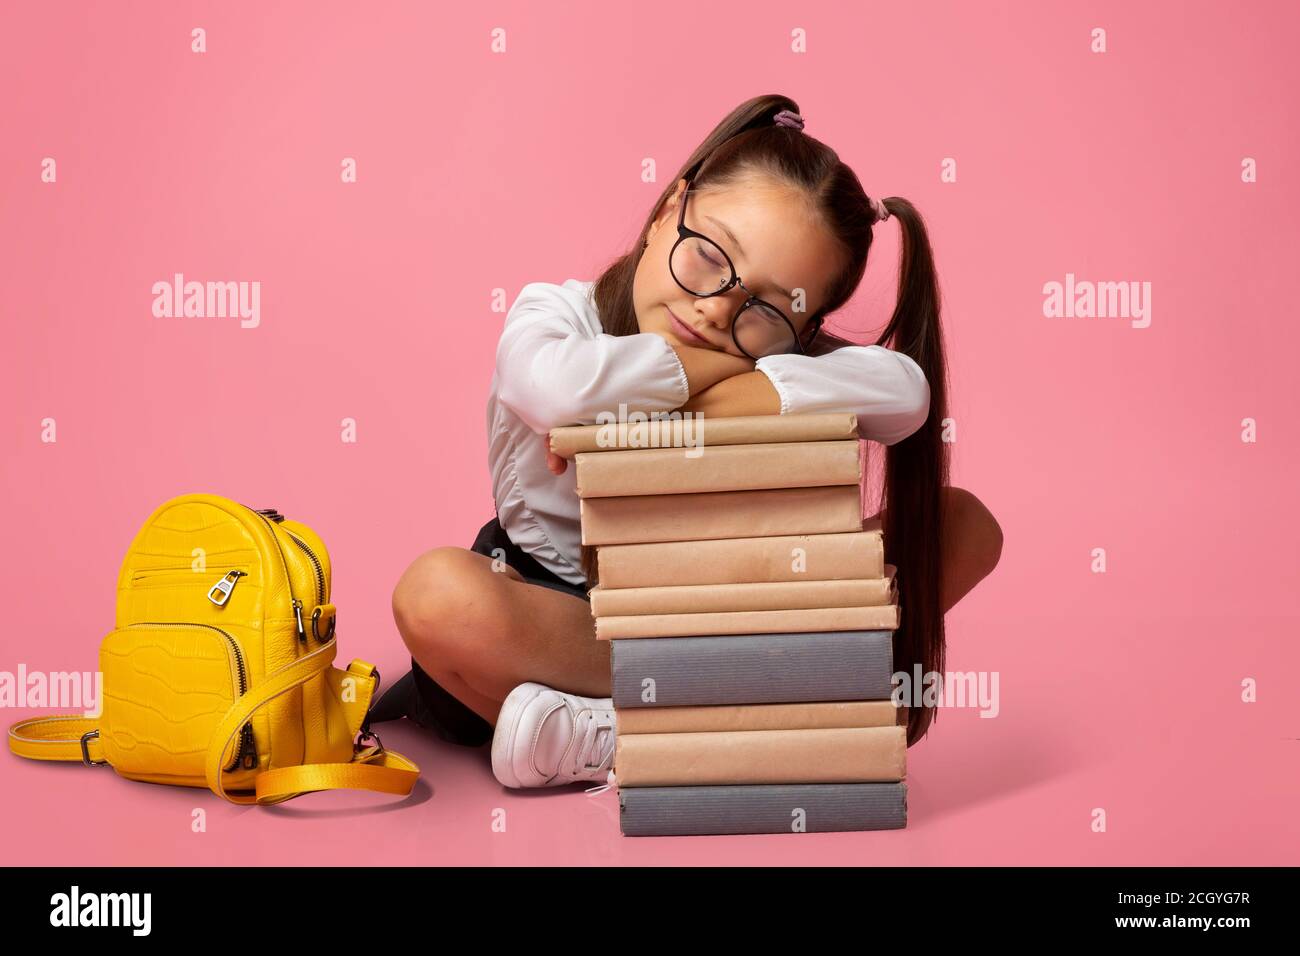 Sad and tired concept. Girl in glasses in uniform with backpack sleeps on stack of books Stock Photo